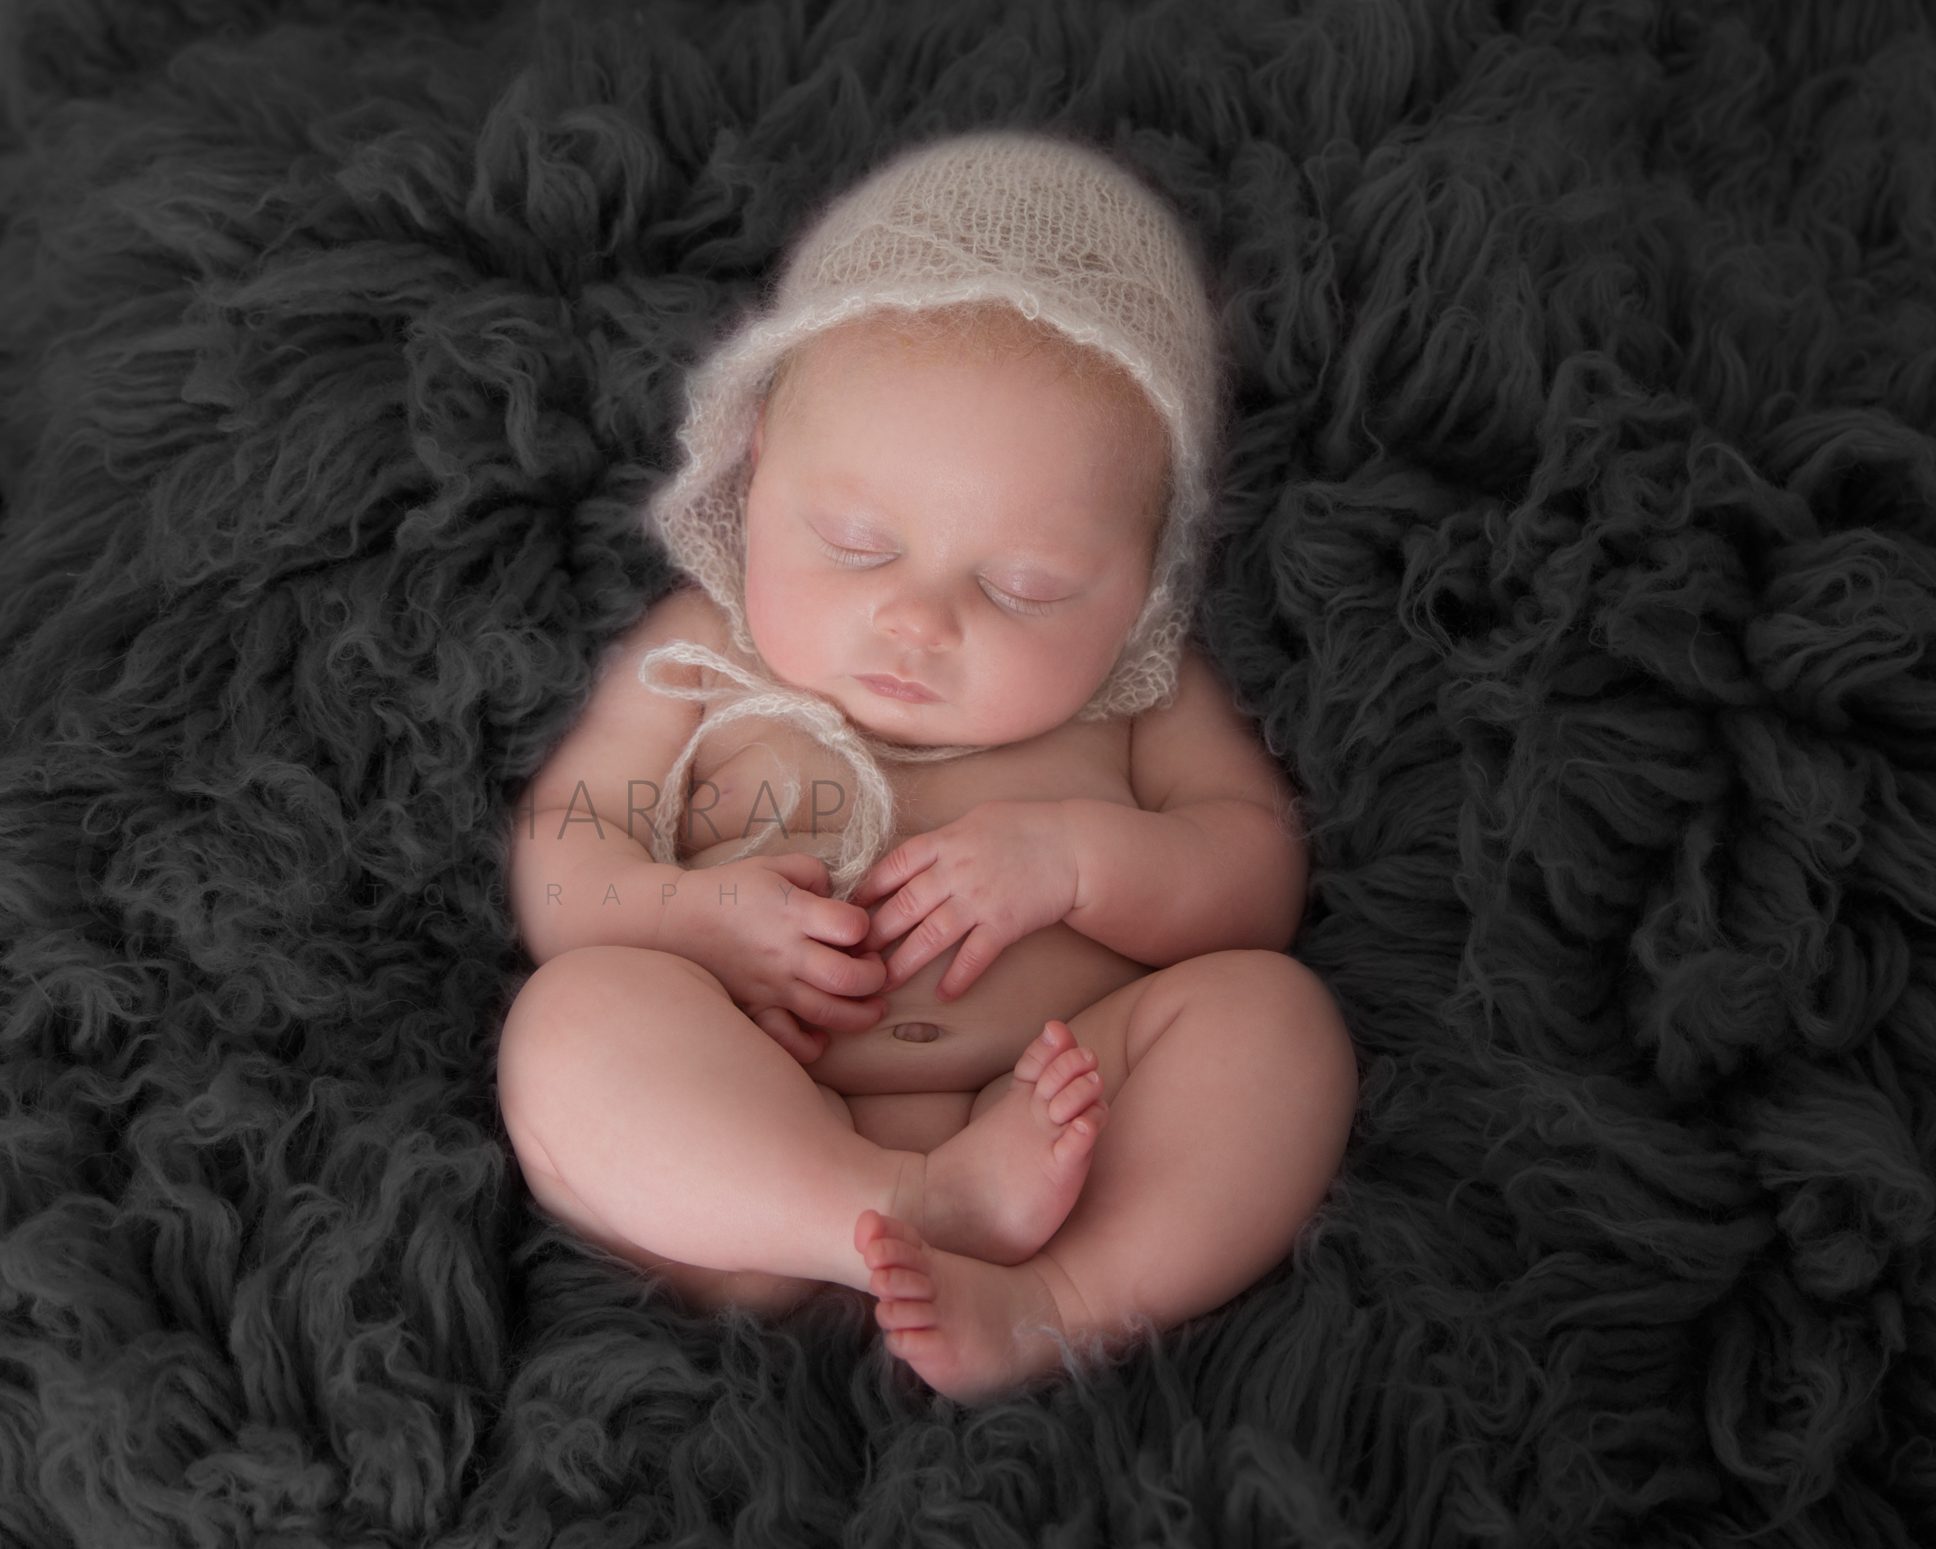 Newborn baby photograph with baby in butterfly and bowl setting. 5 days old baby girl